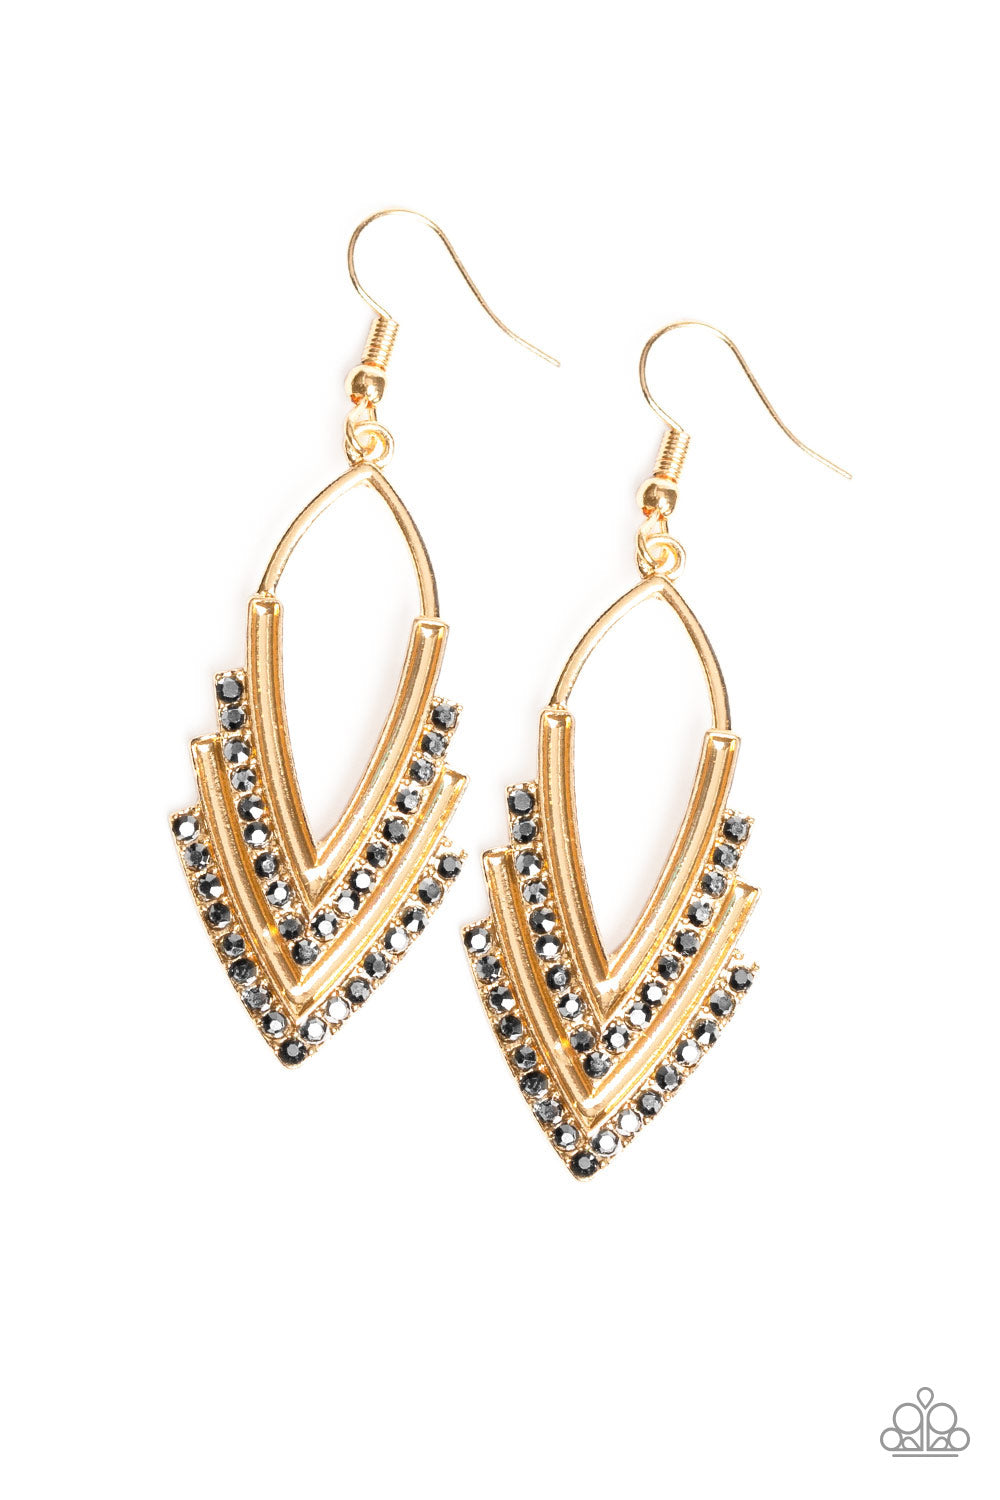 Aretes Fall in Love PM S00 - Mujer - Bisutería